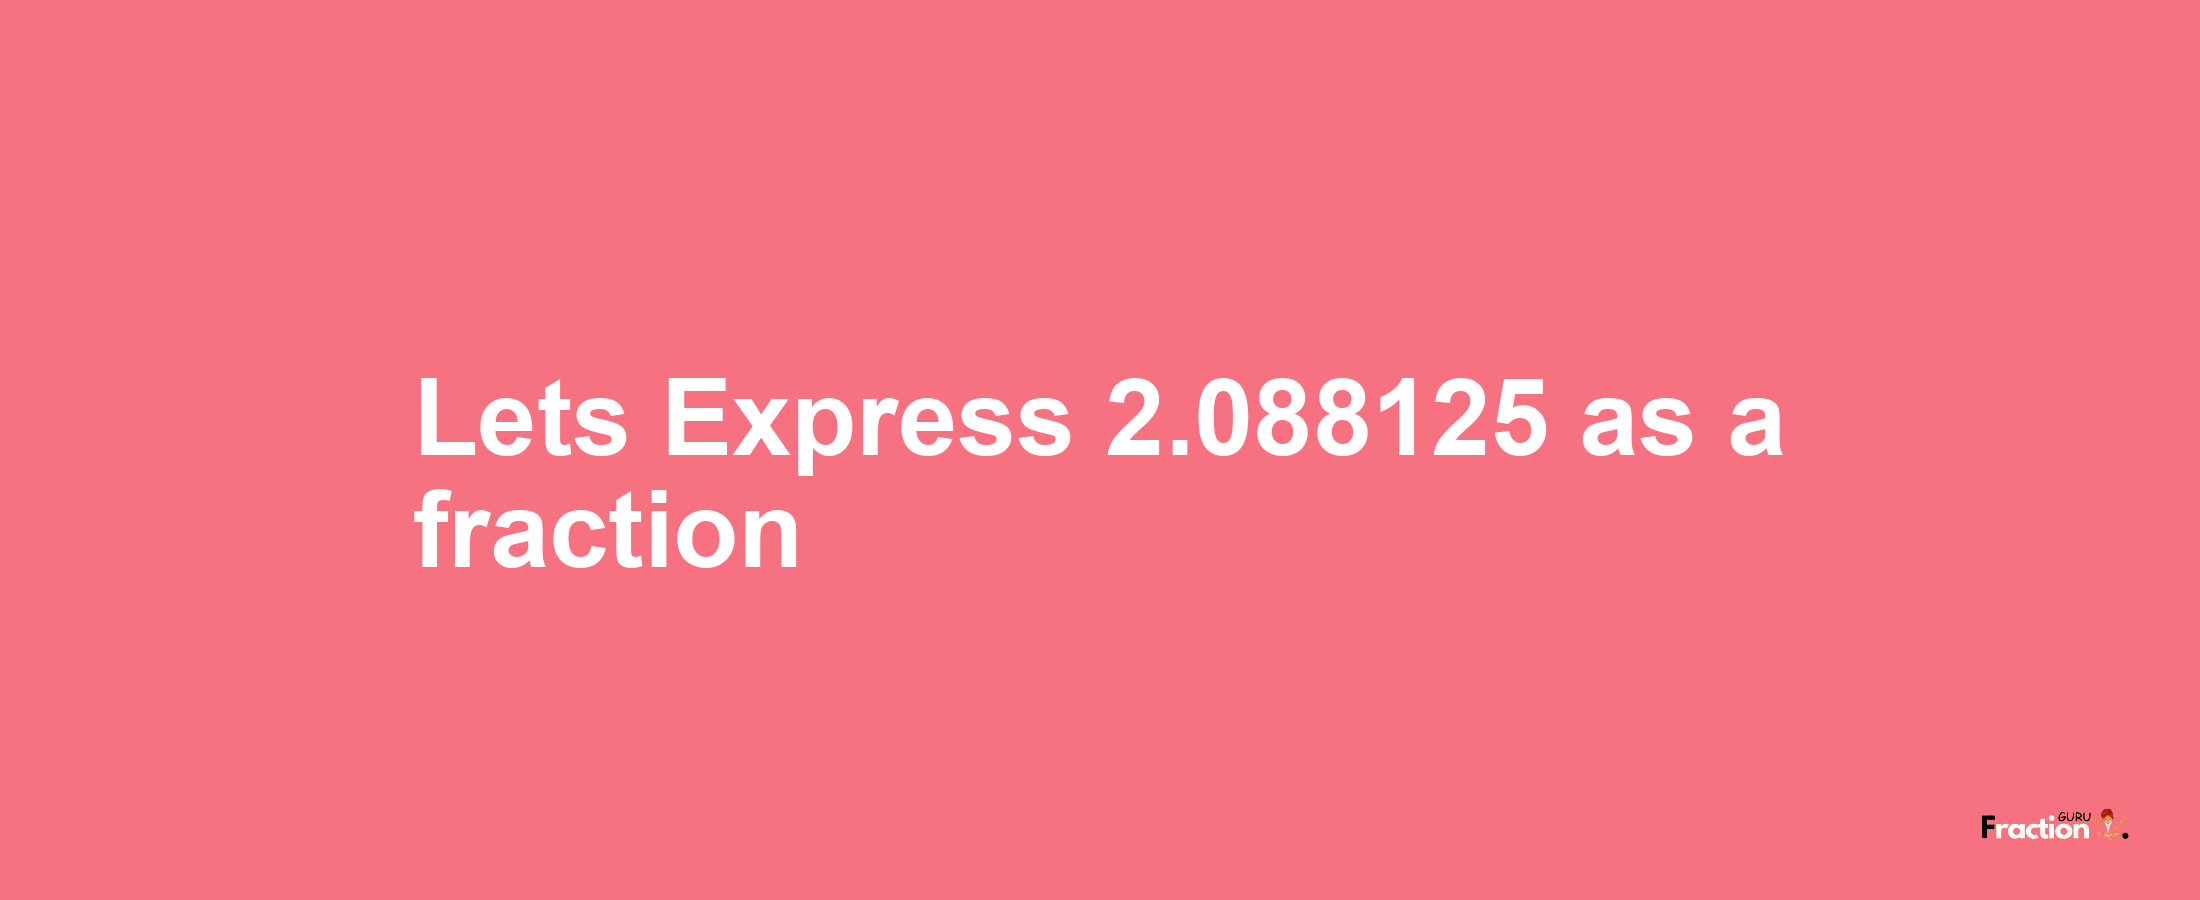 Lets Express 2.088125 as afraction